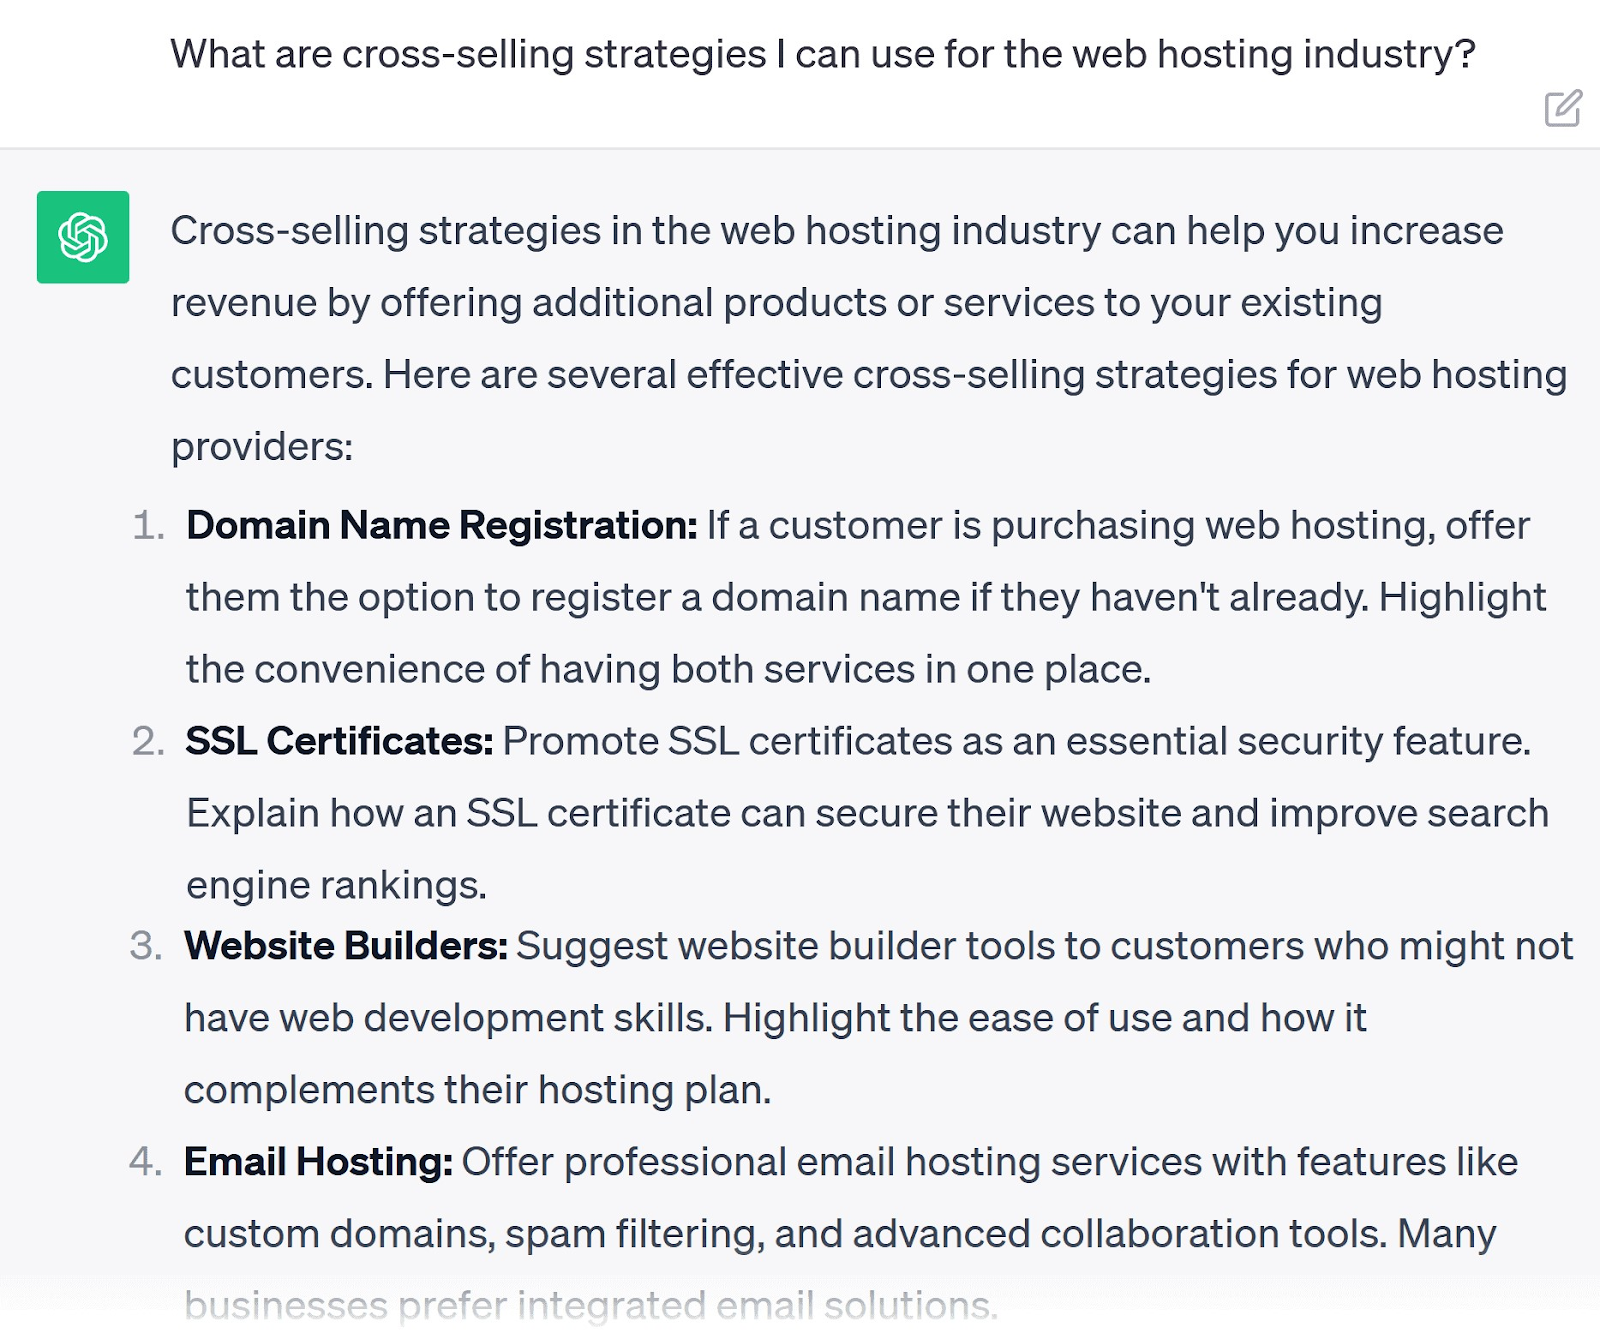 A prompt asking ChatGPT "What are cross-selling strategies I can use for web hosting industry?"